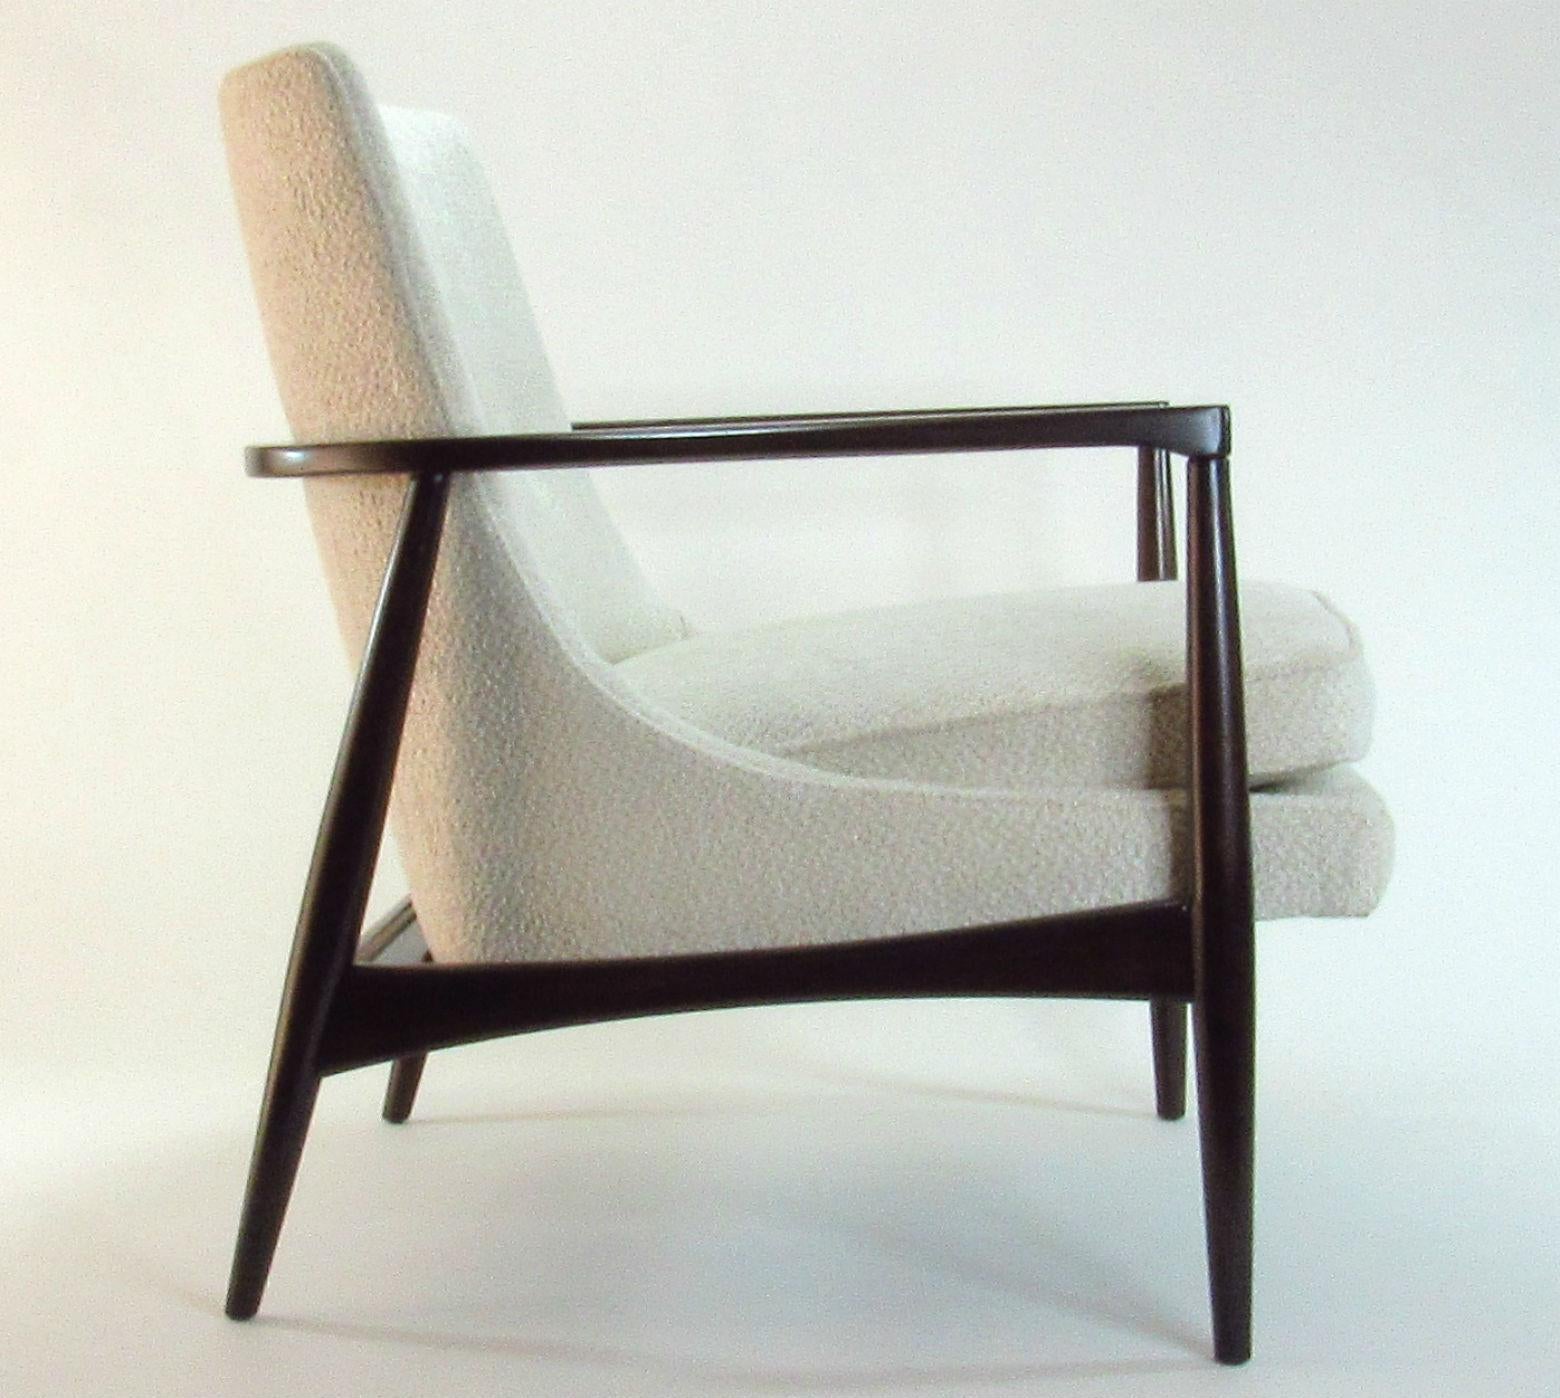 Midcentury Danish Modern lounge chair with beautifully curved refinished wrap-around frame and new imported woven chenille upholstery in neutral oatmeal. Comfortable, soft and sculptural. In excellent restored condition.